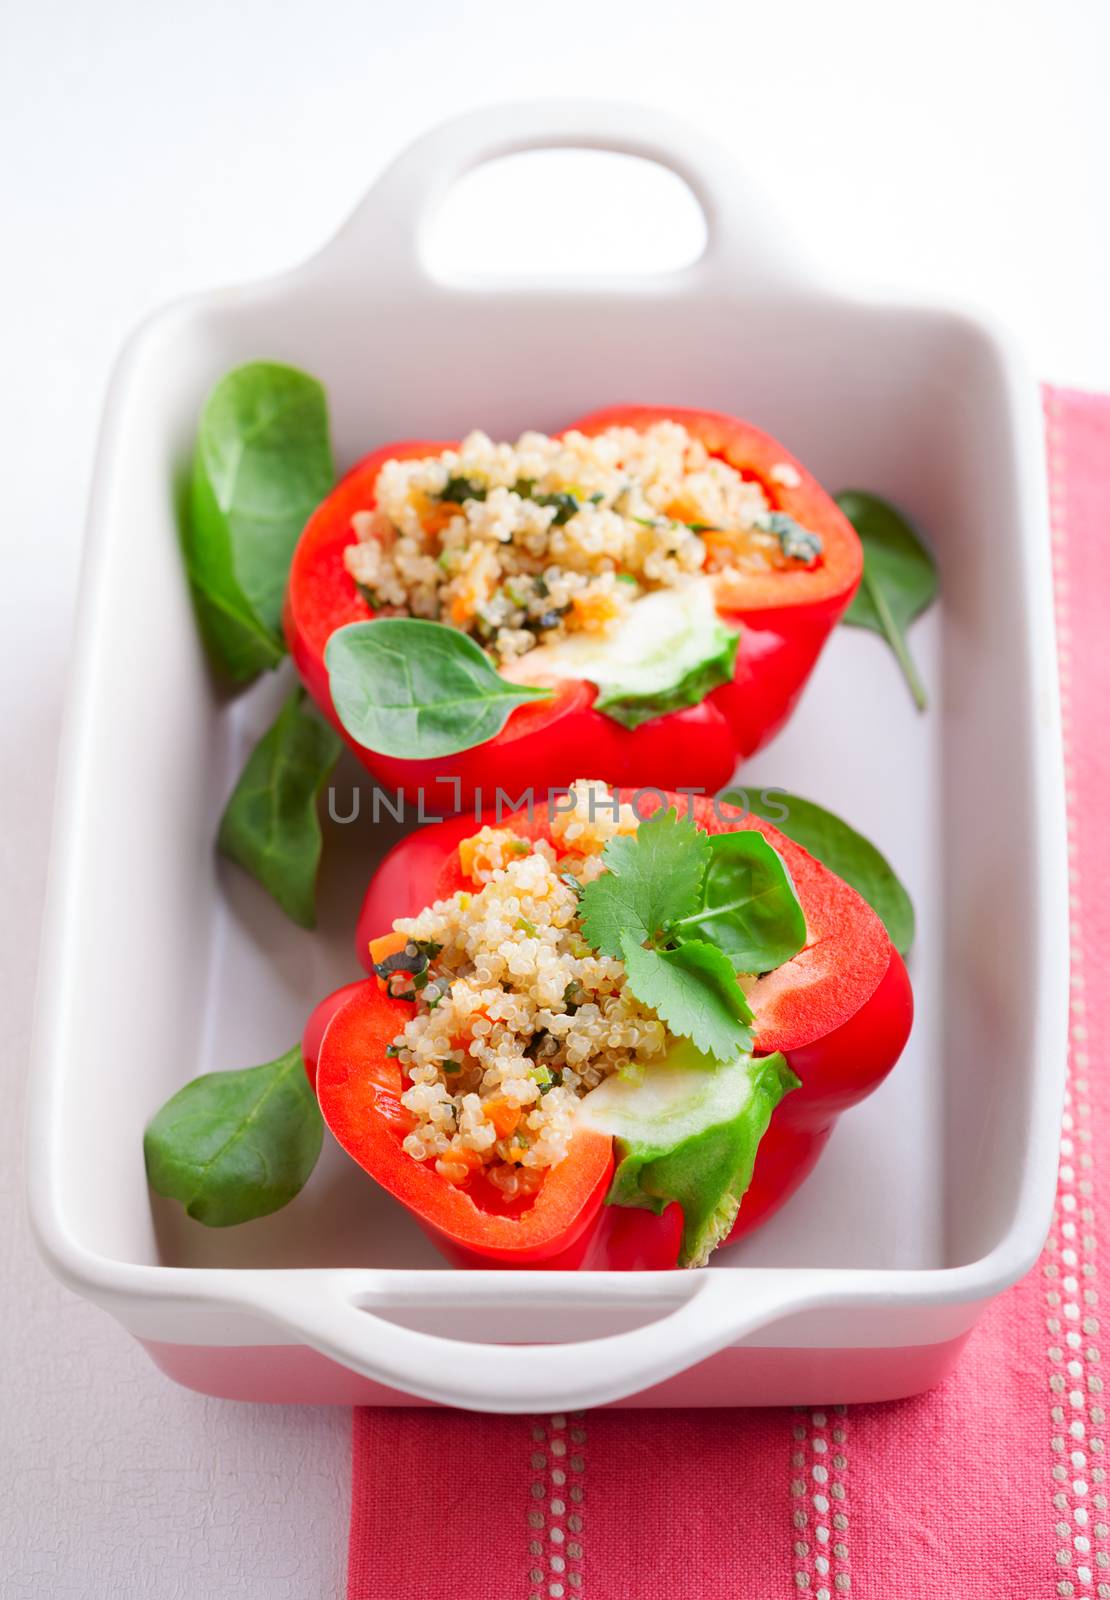 Stuffed red peppers by supercat67